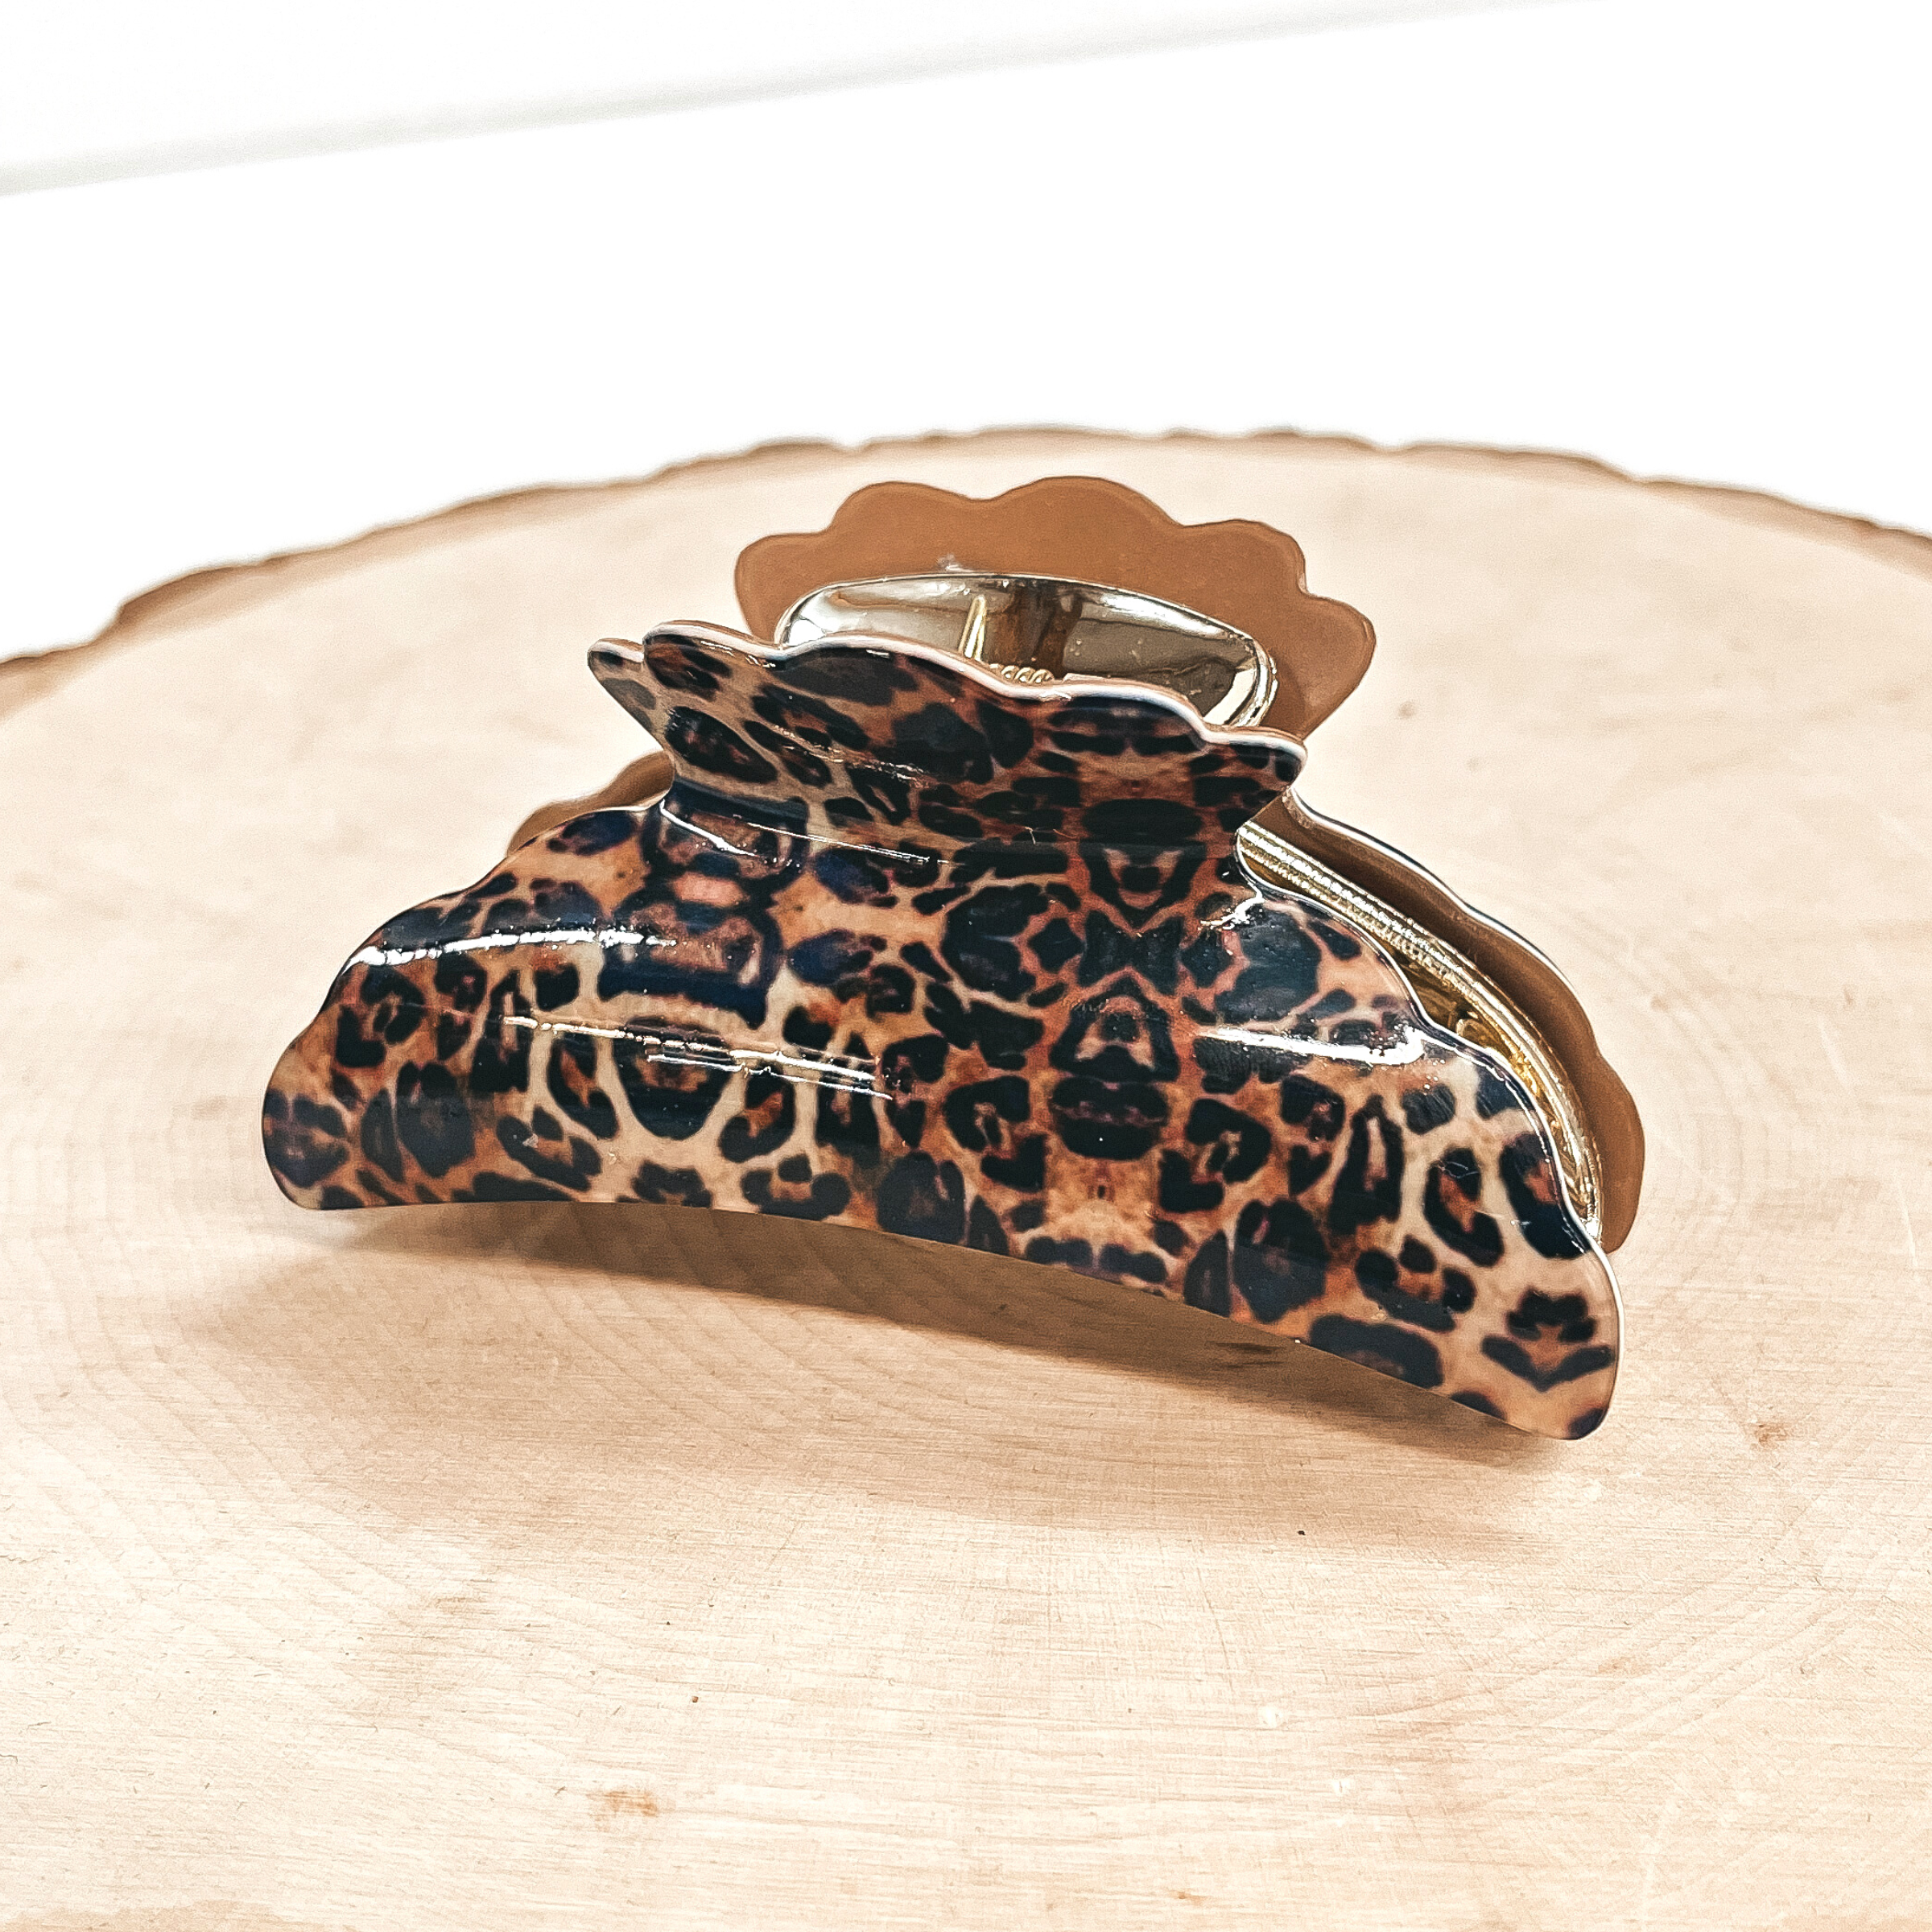 This is a small leopard print hair clips with a gold tone inlay in light brown.   This hair clip is taken on a slab of wood and on a white background.